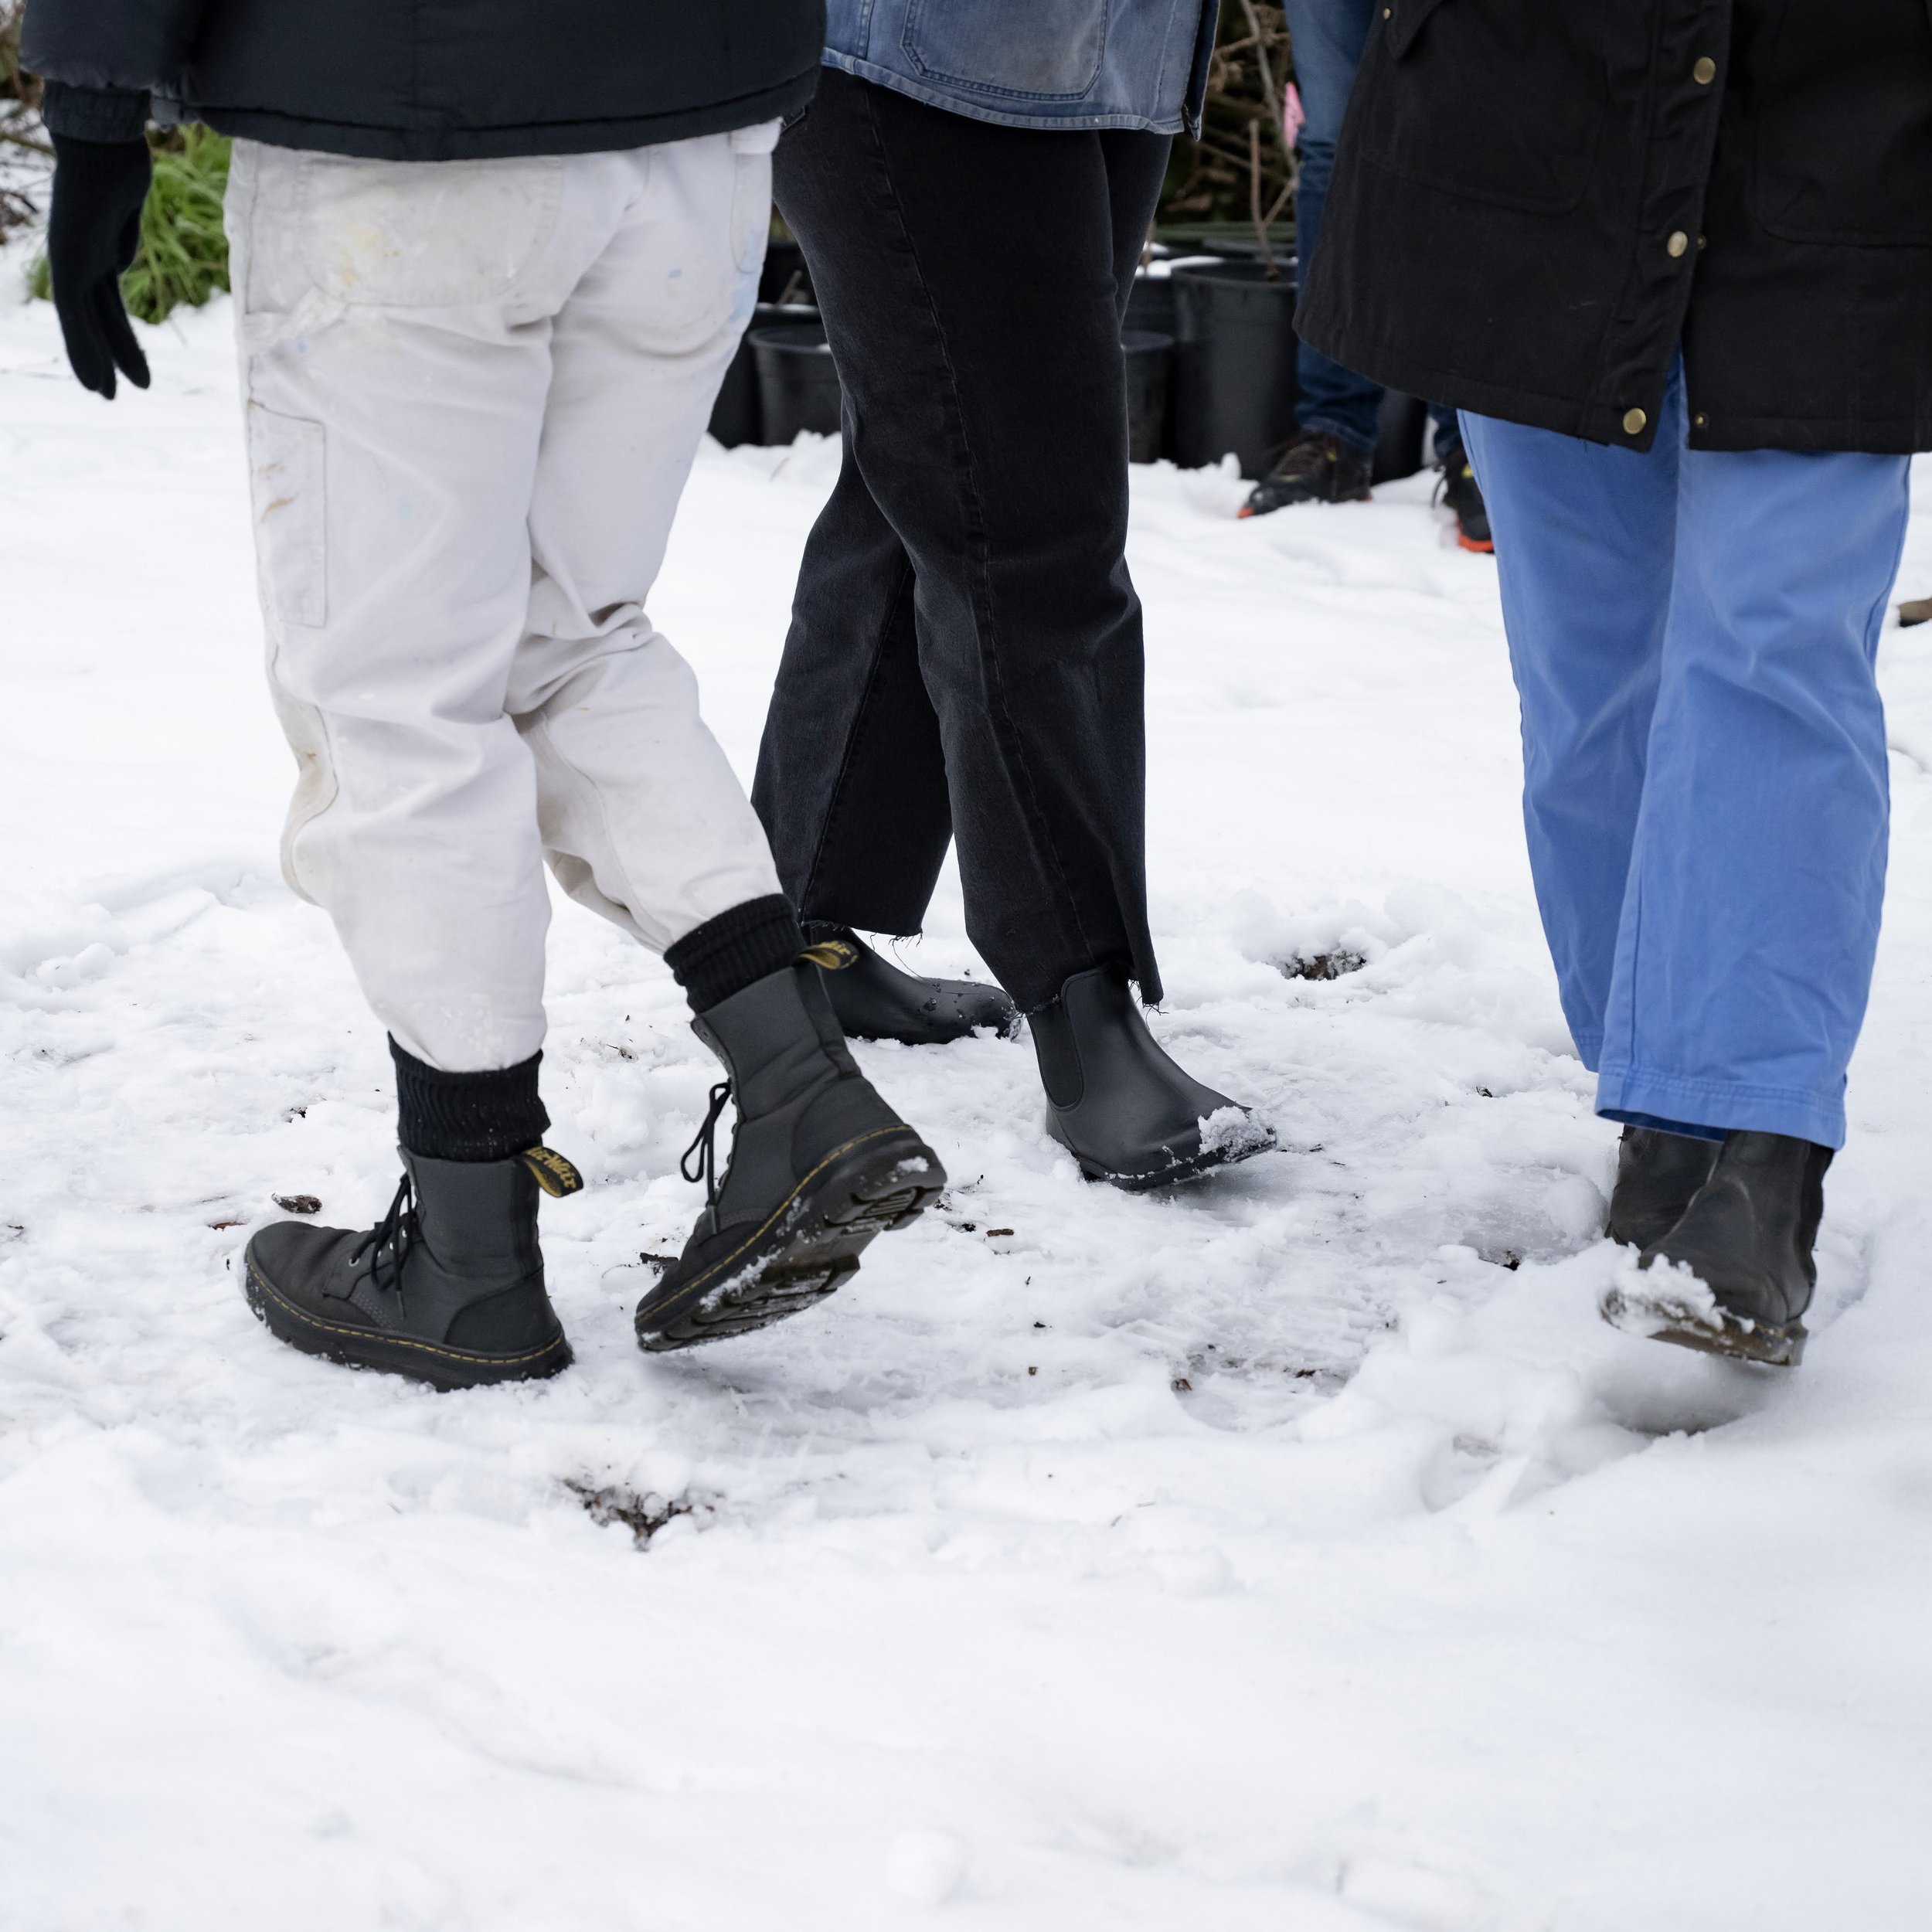  three peoples legs: they are all wearing pants and boots, and they are walking in a circular formation in the snow  